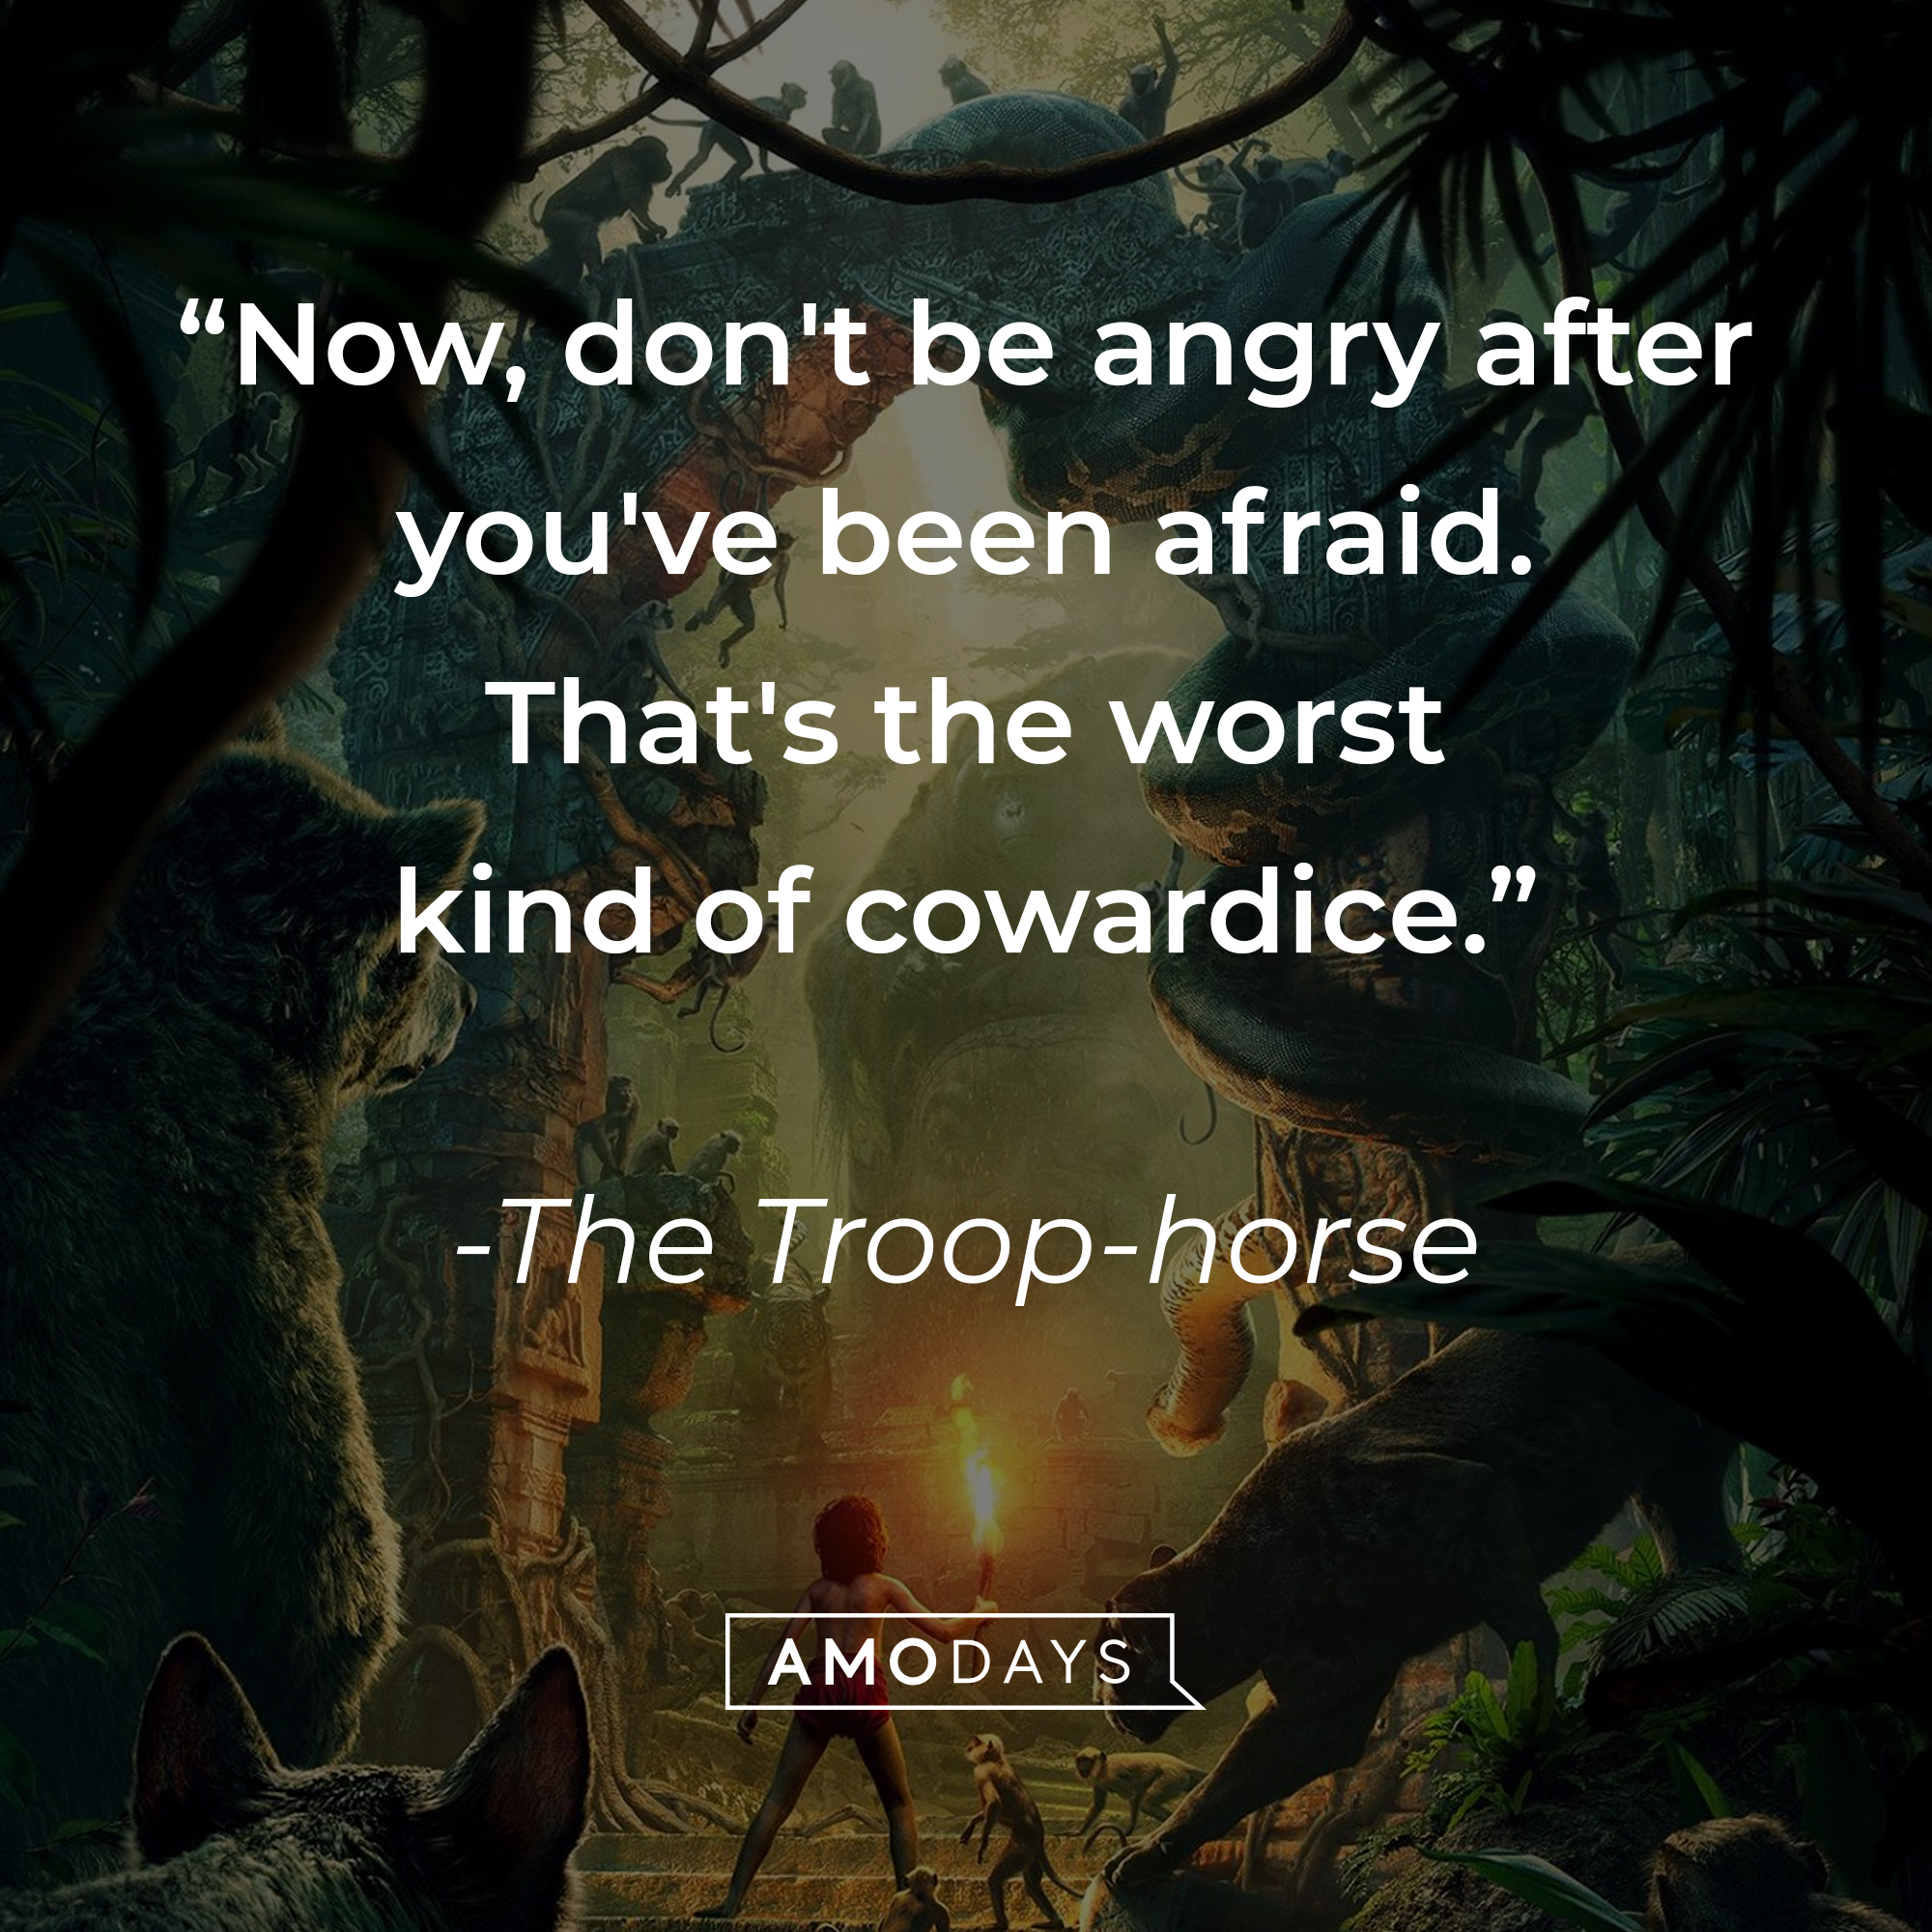 The Troop-horse's quote: "Now, don't be angry after you've been afraid. That's the worst kind of cowardice." | Source: facebook.com/DisneyJungleBook